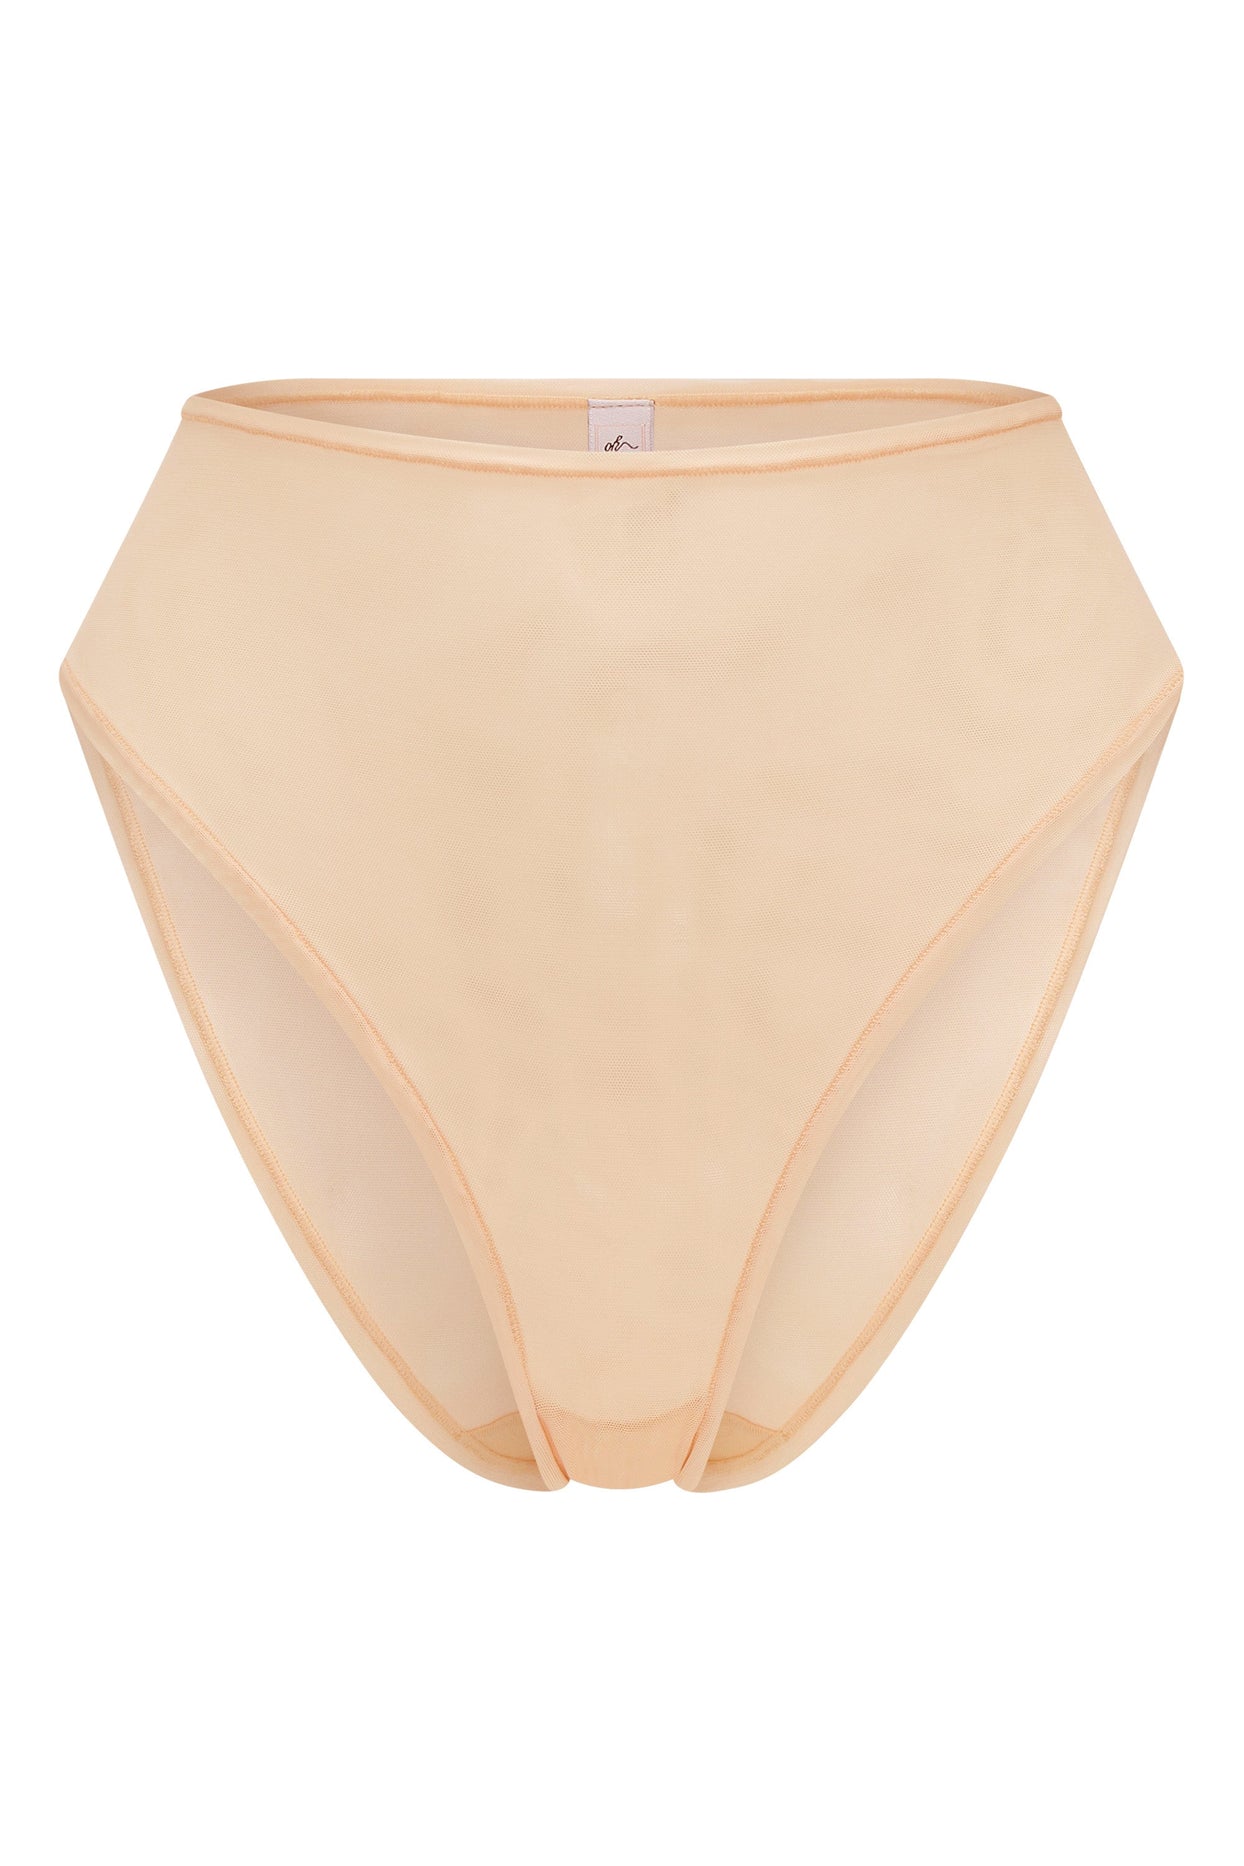 Intimates Soft Mesh High Waisted Knicker in Beige